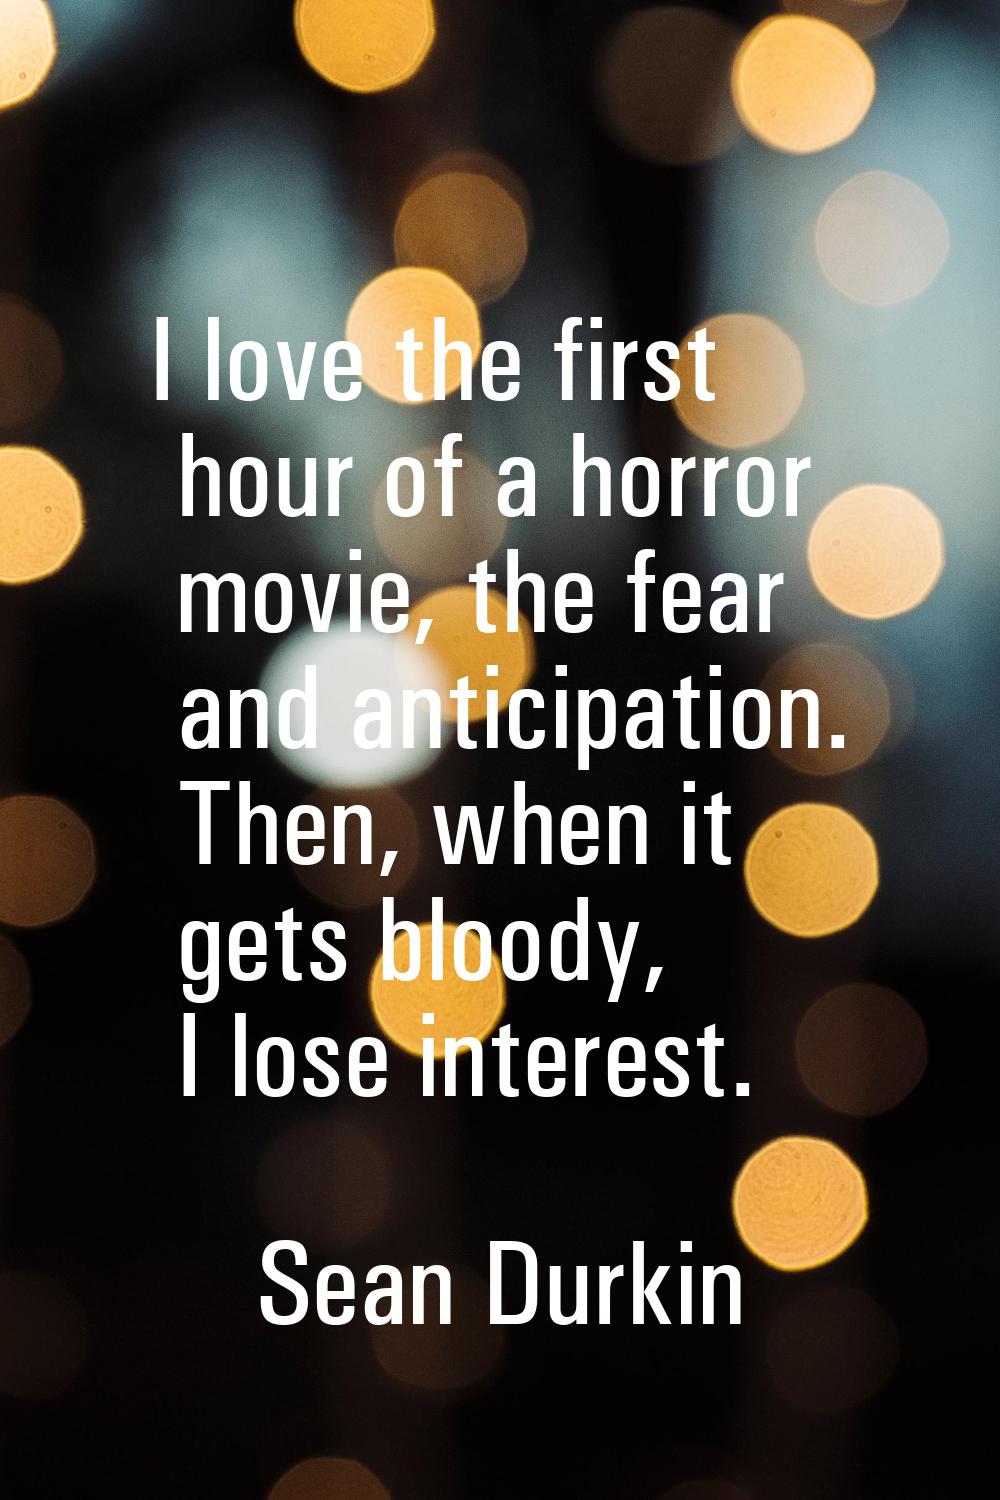 I love the first hour of a horror movie, the fear and anticipation. Then, when it gets bloody, I lo